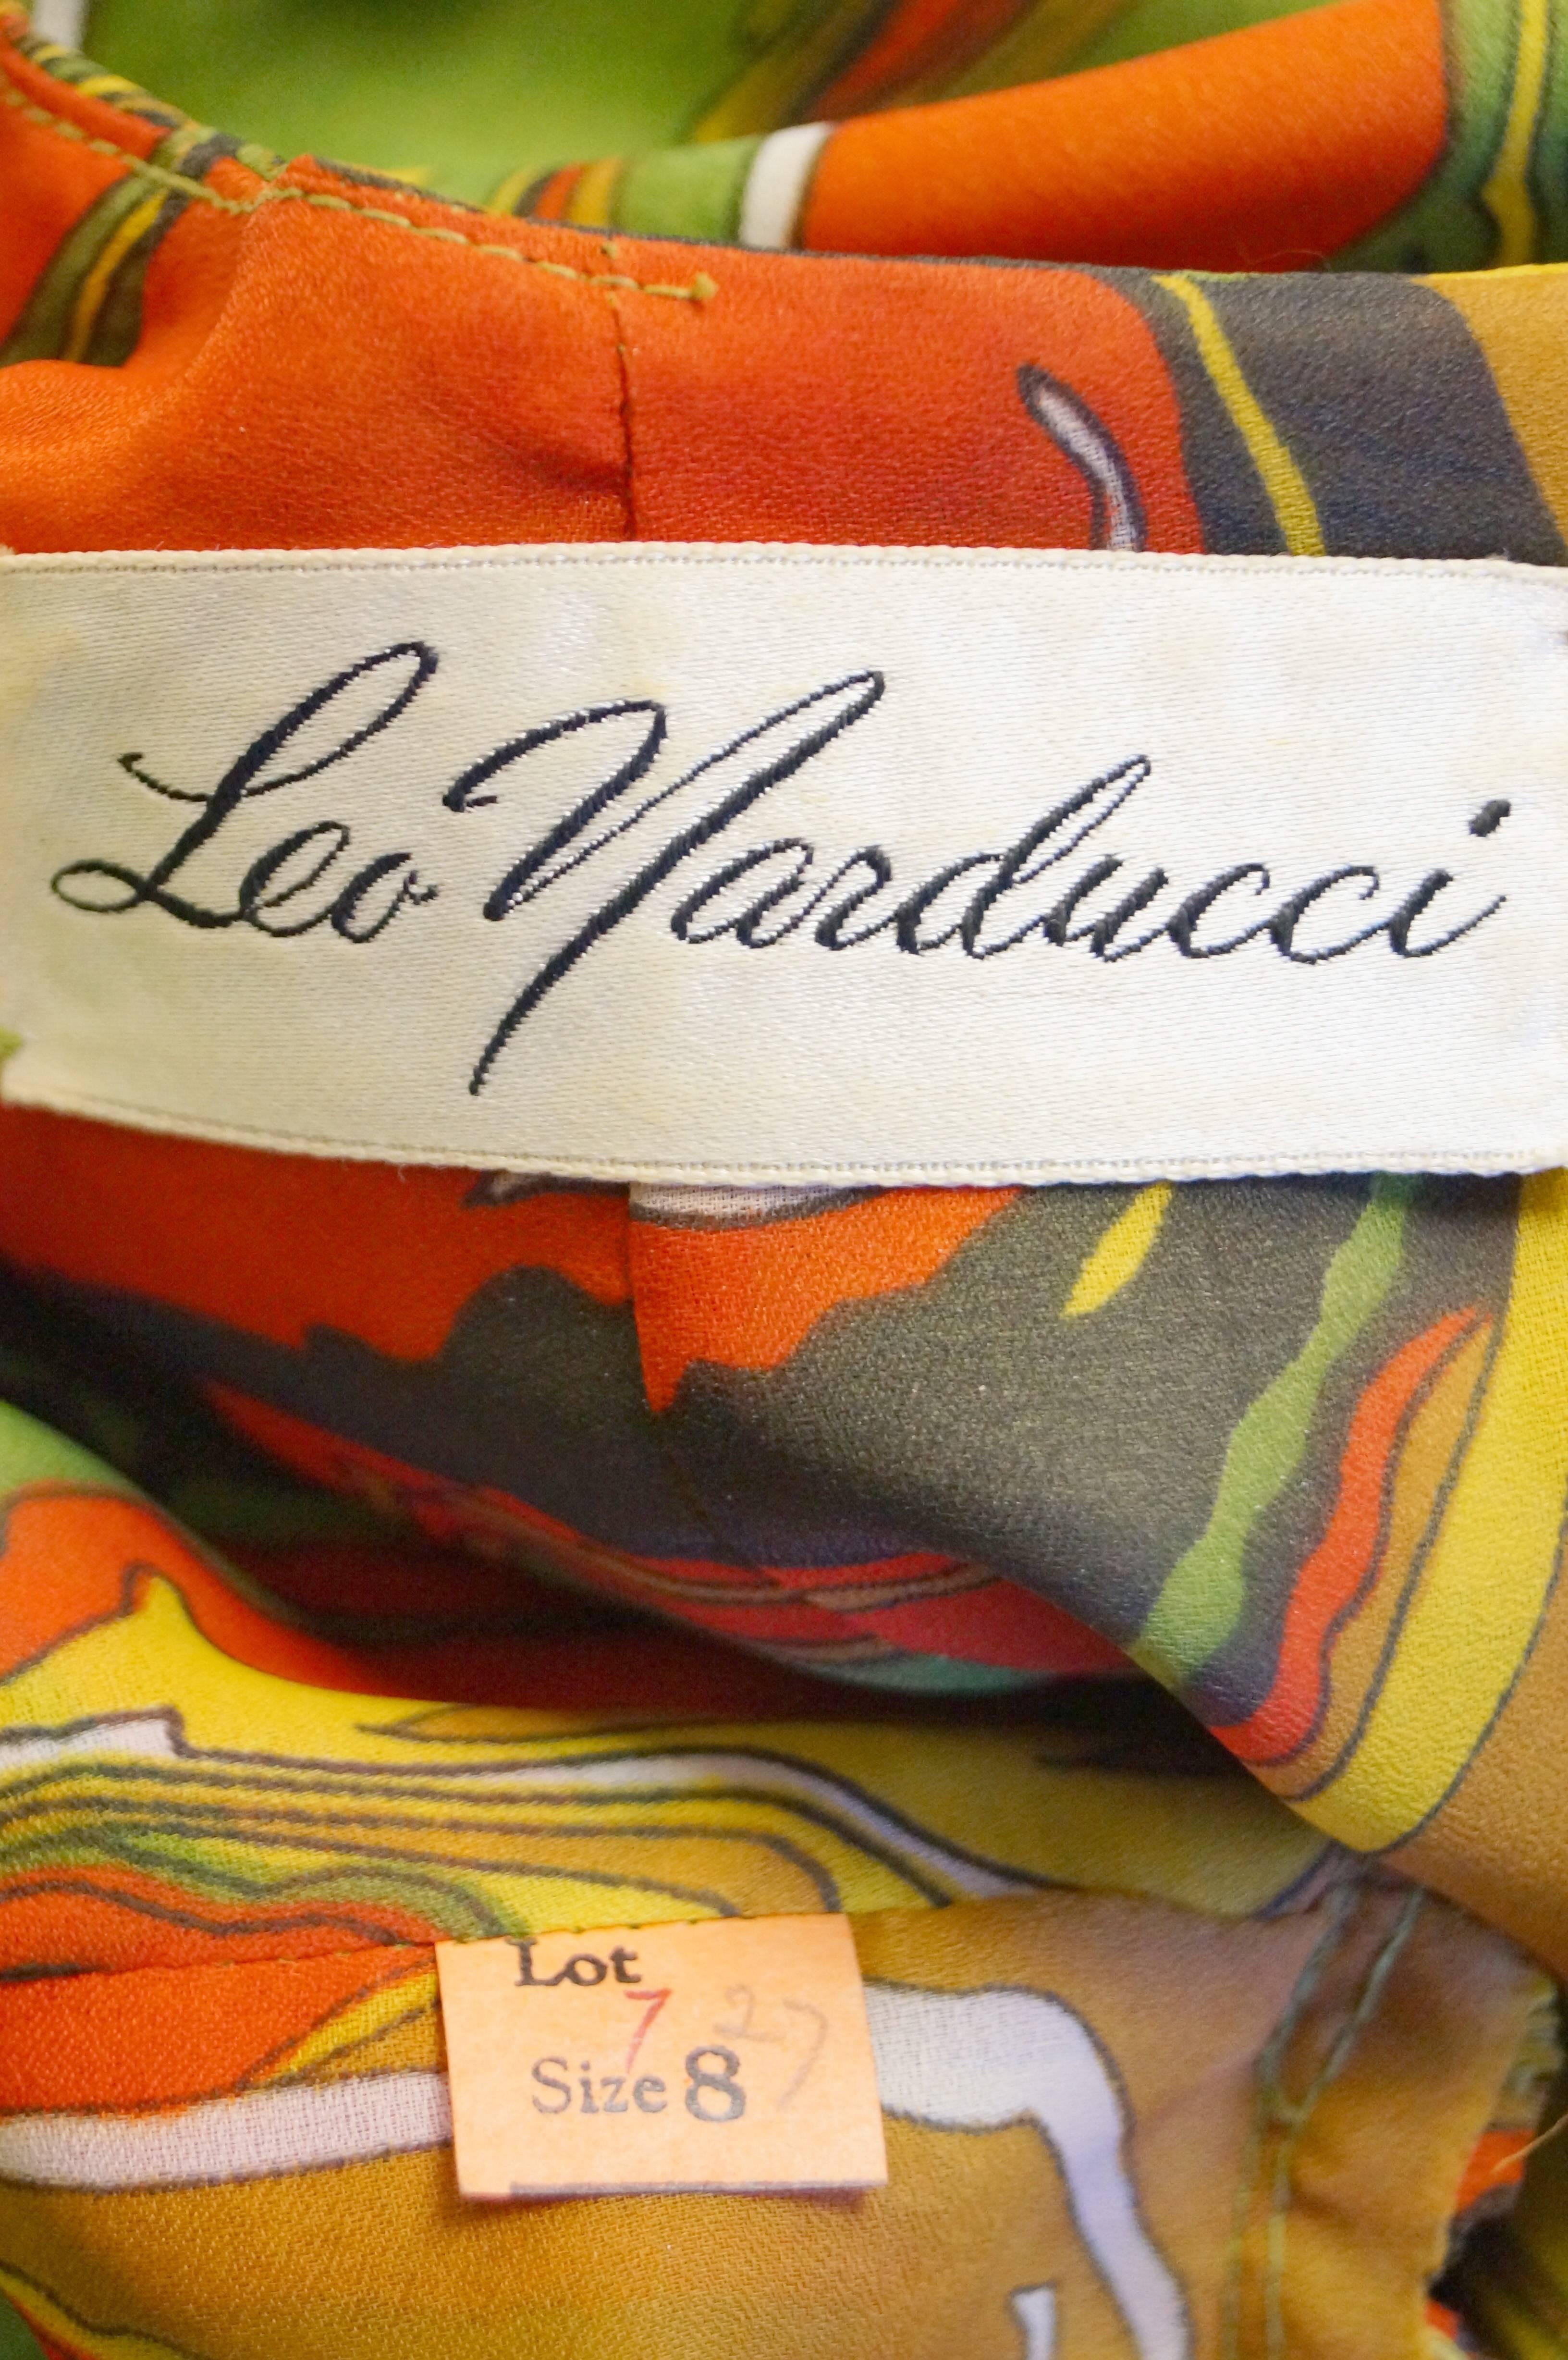 Leo Narducci Multicolor Ebru Marbling Print Dress, 1960s  In Excellent Condition For Sale In Houston, TX